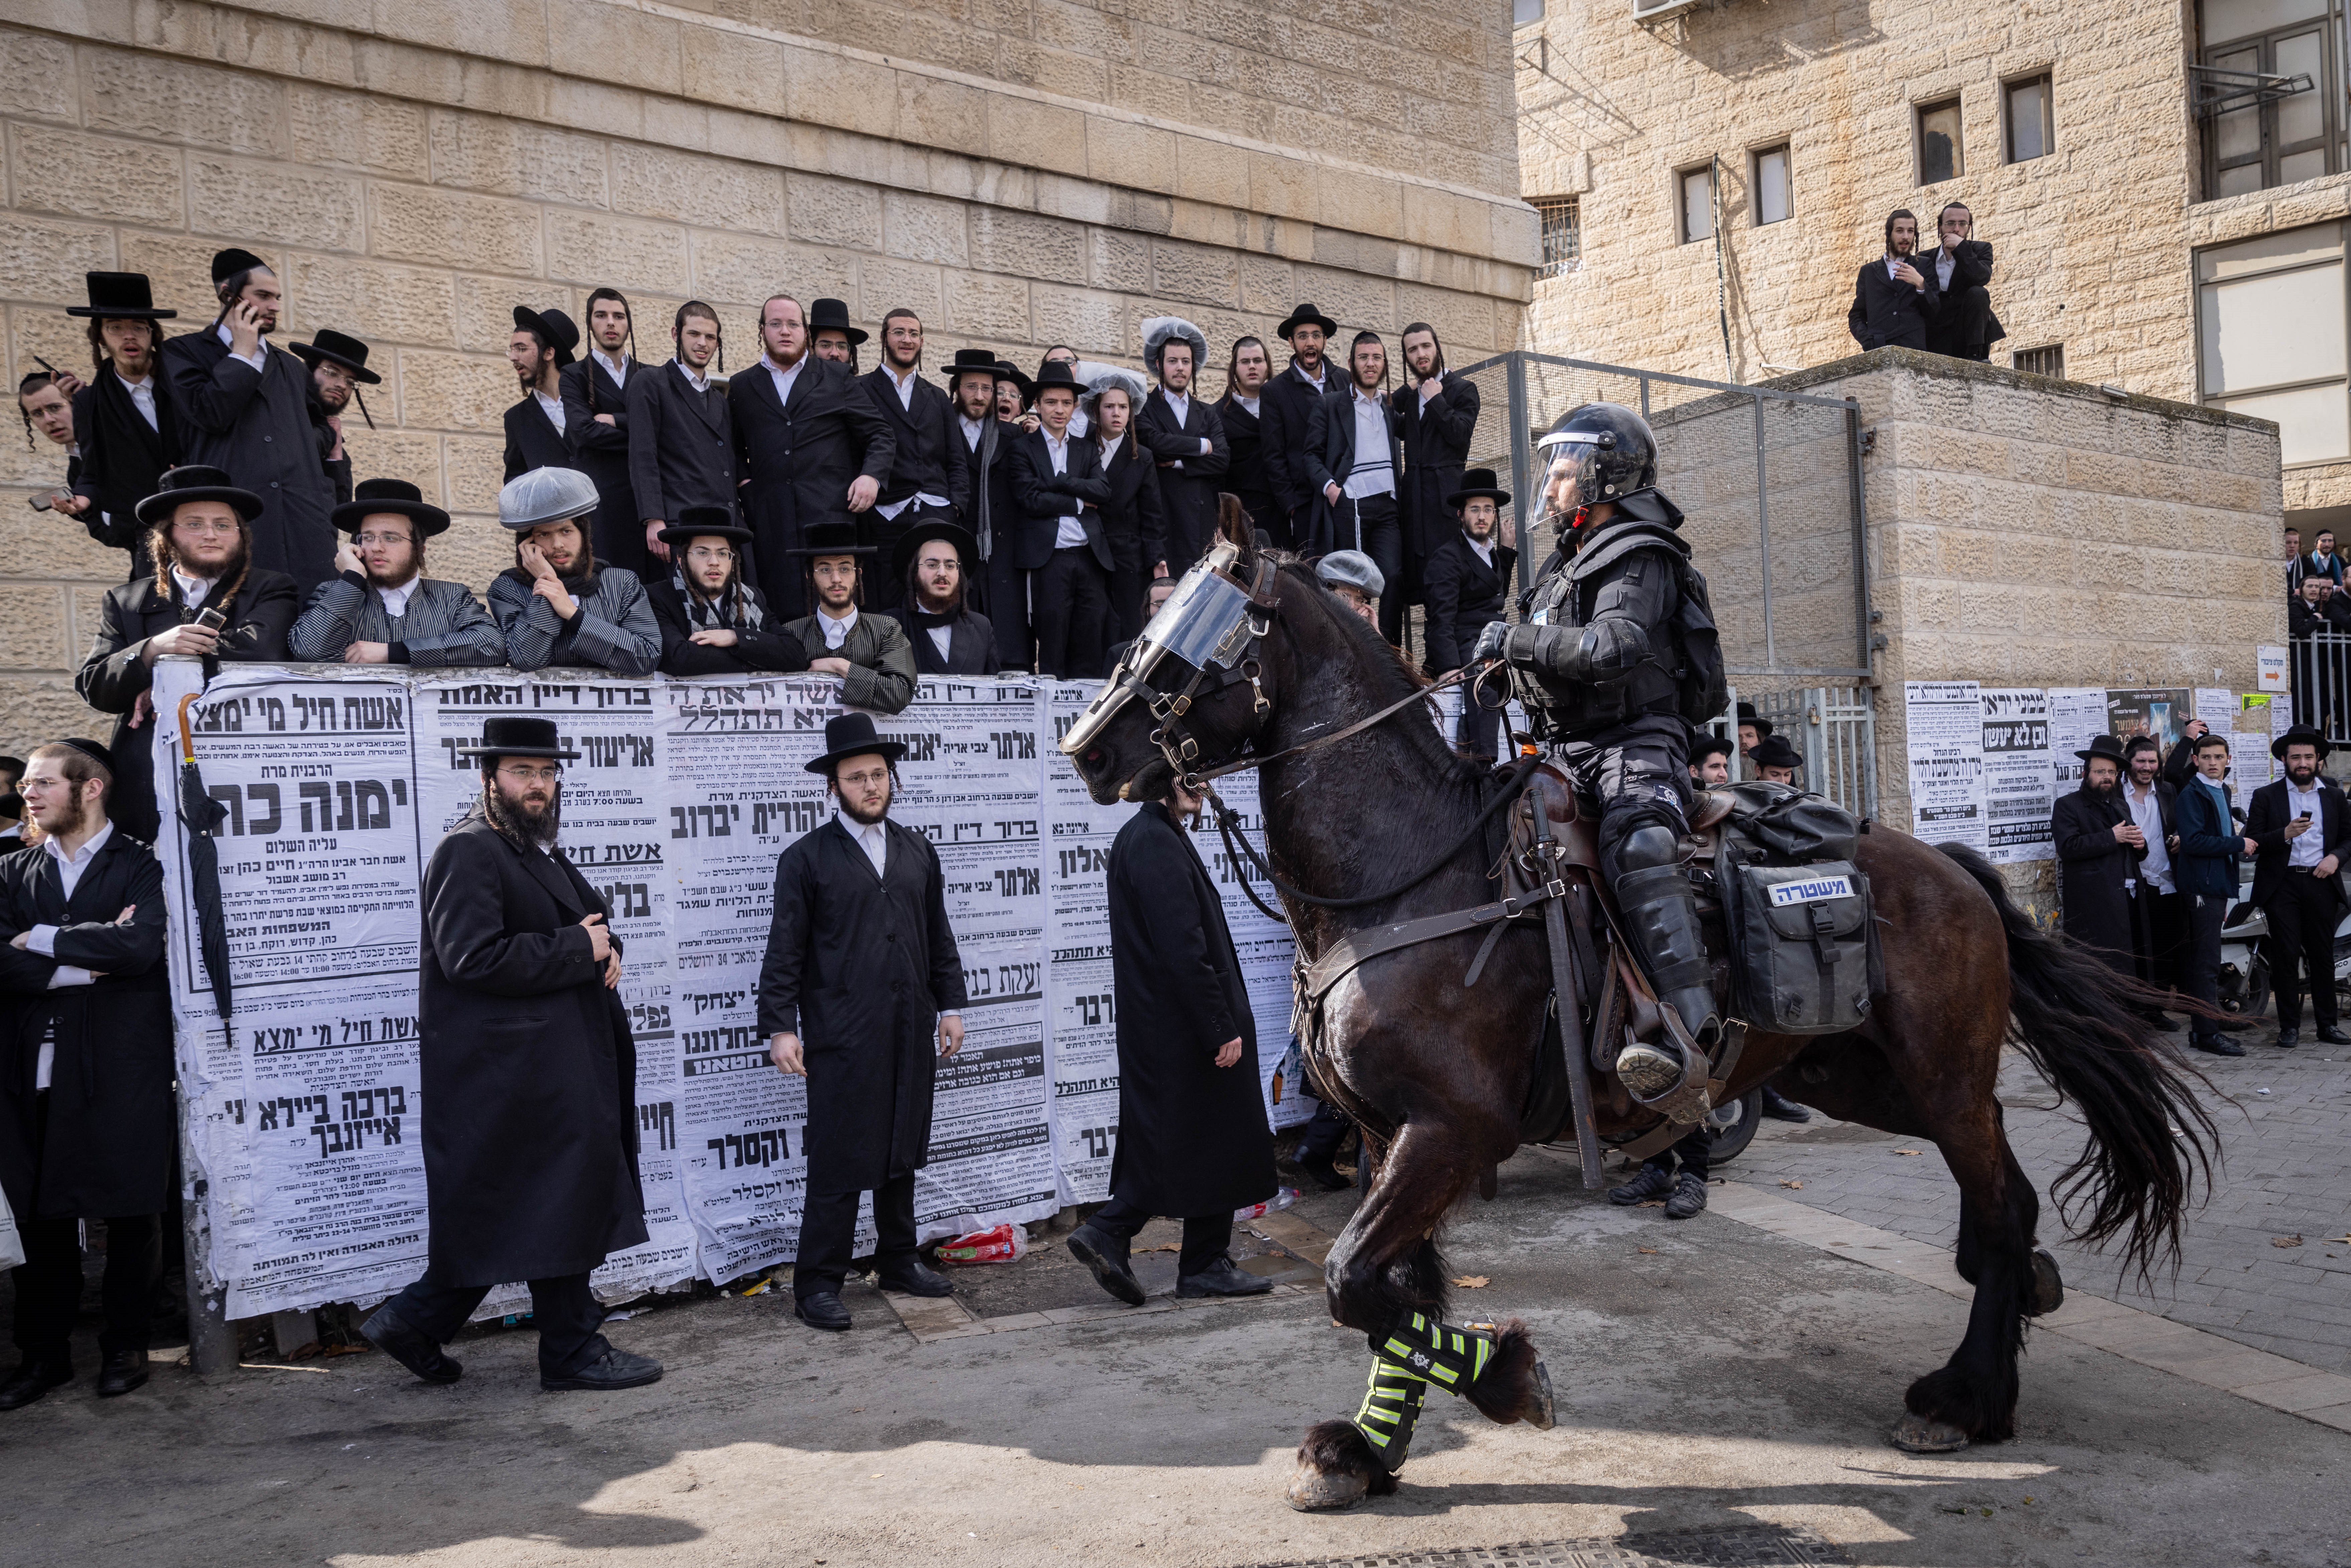 Bordering Beliefs: Israel’s Sociopolitical Divide Between Liberal and Ultra-Orthodox Values